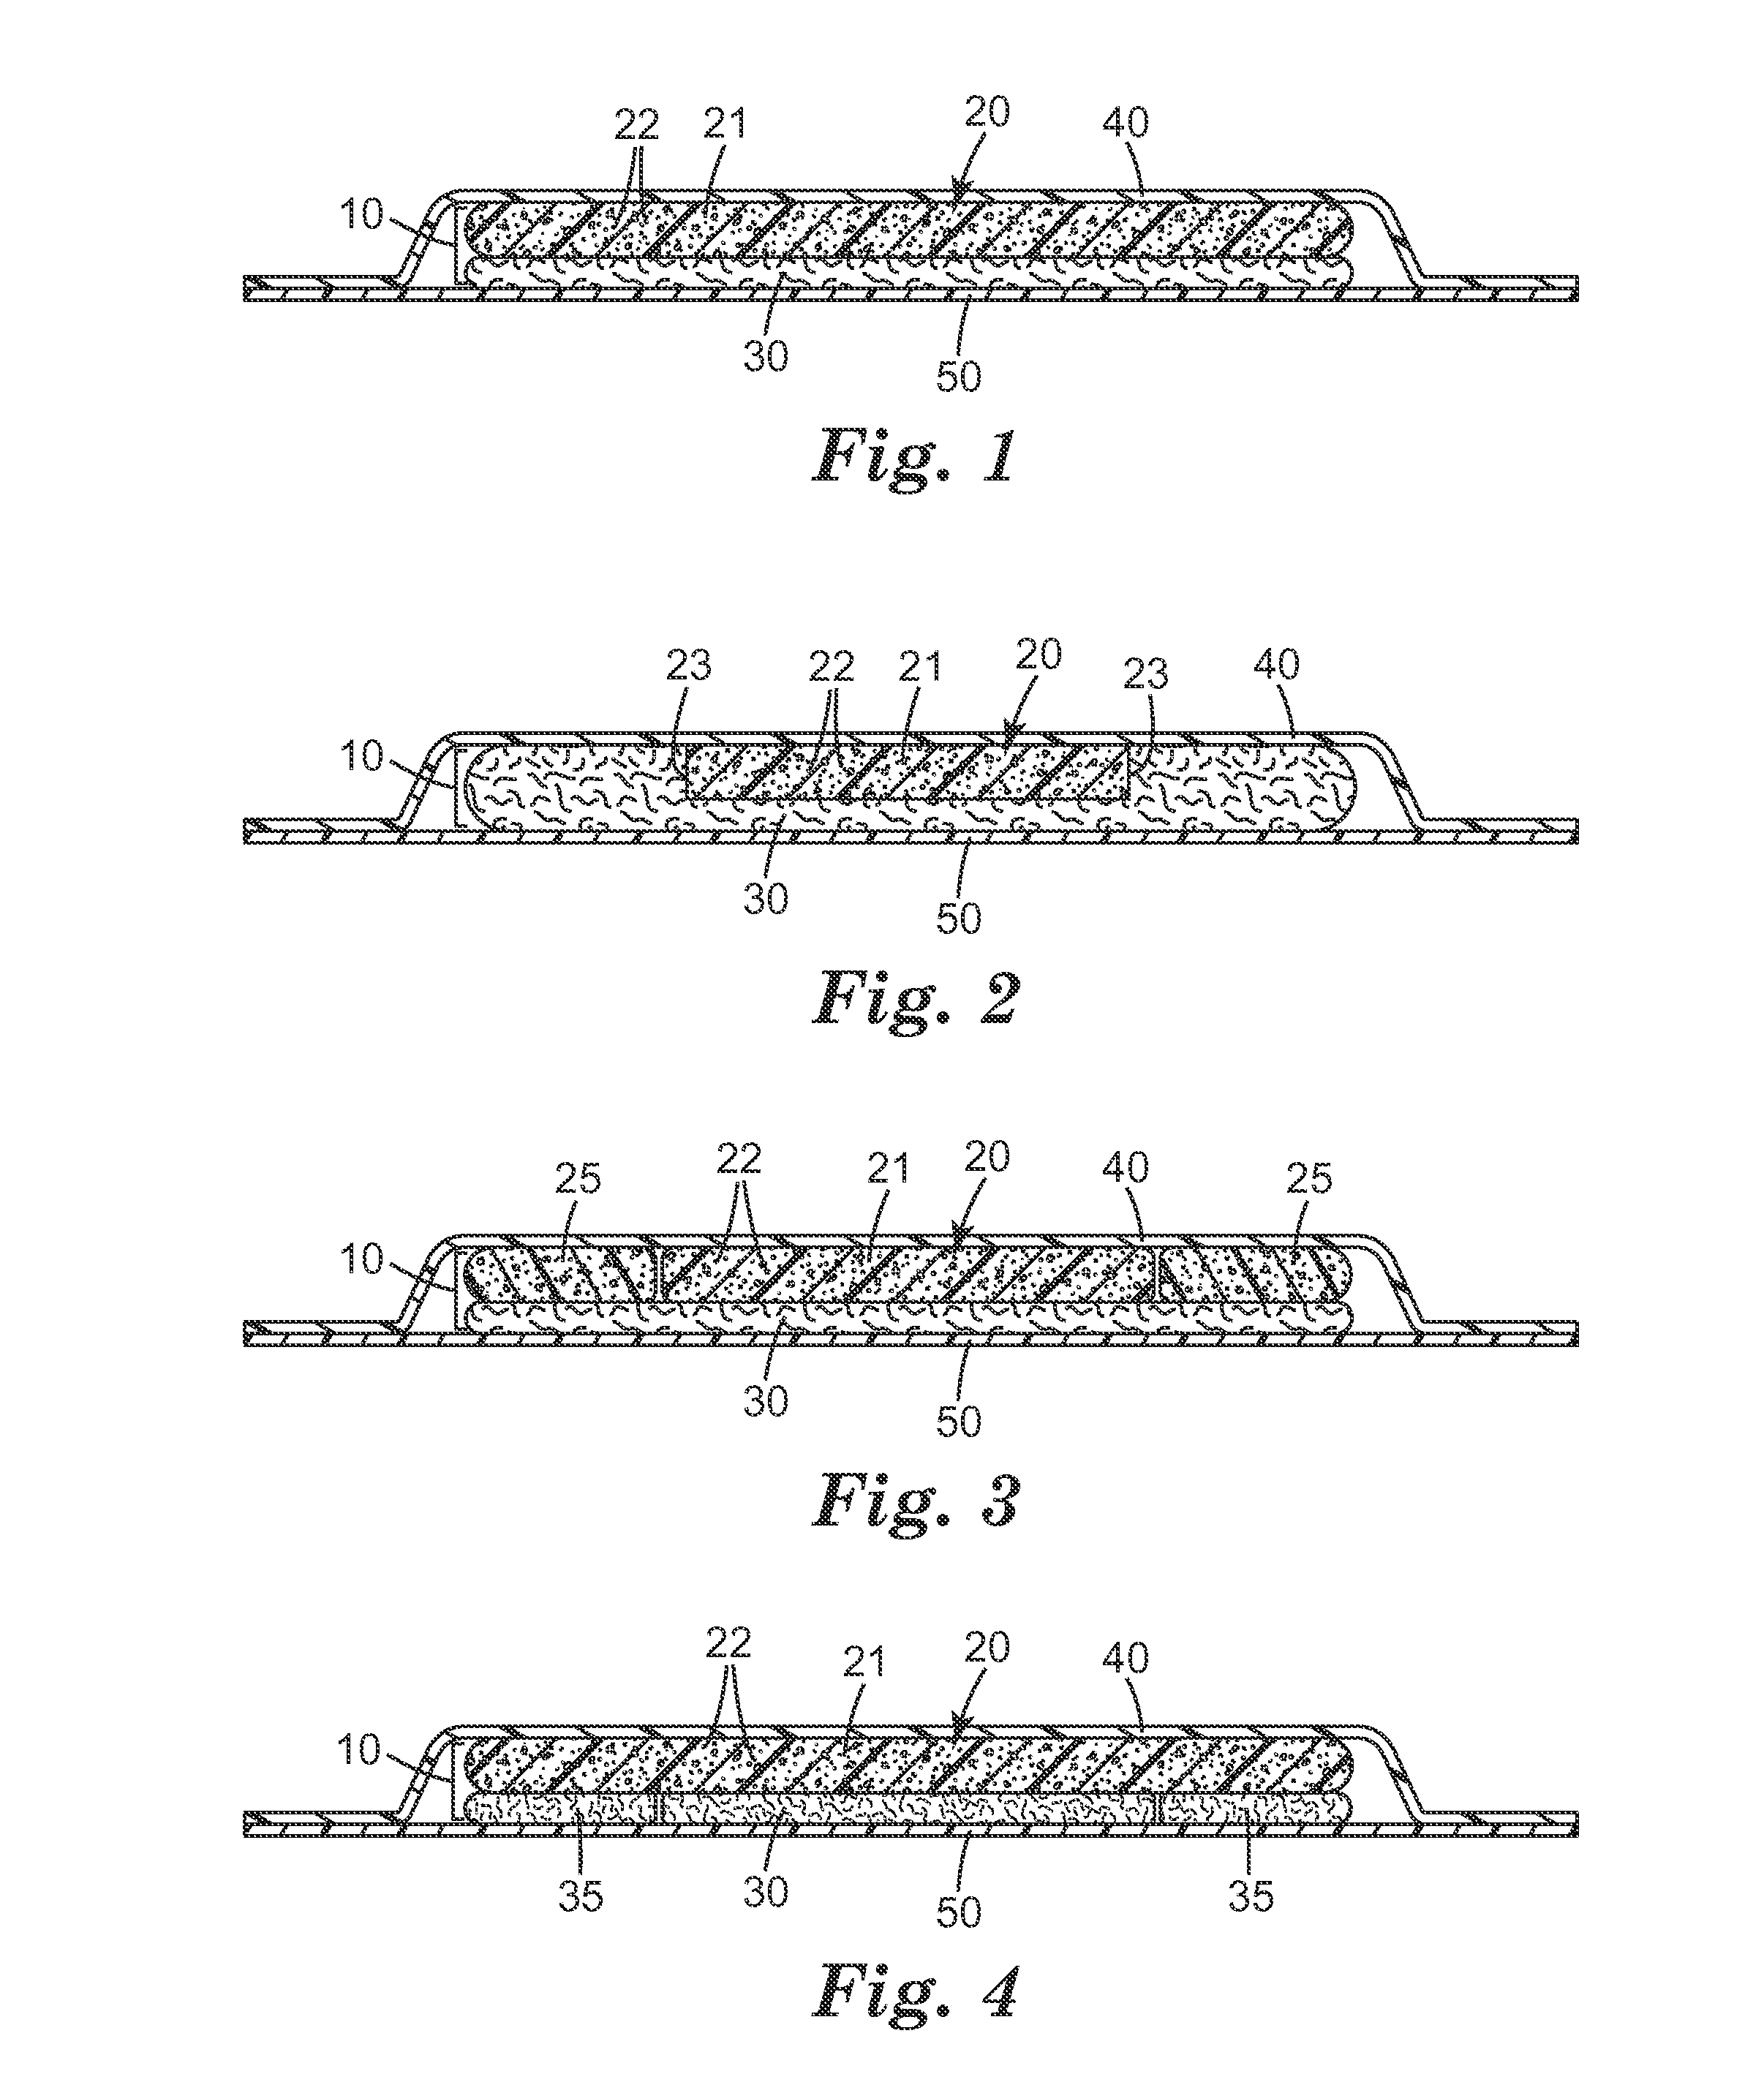 Absorbent article comprising polymeric foam with superabsorbent and intermediates